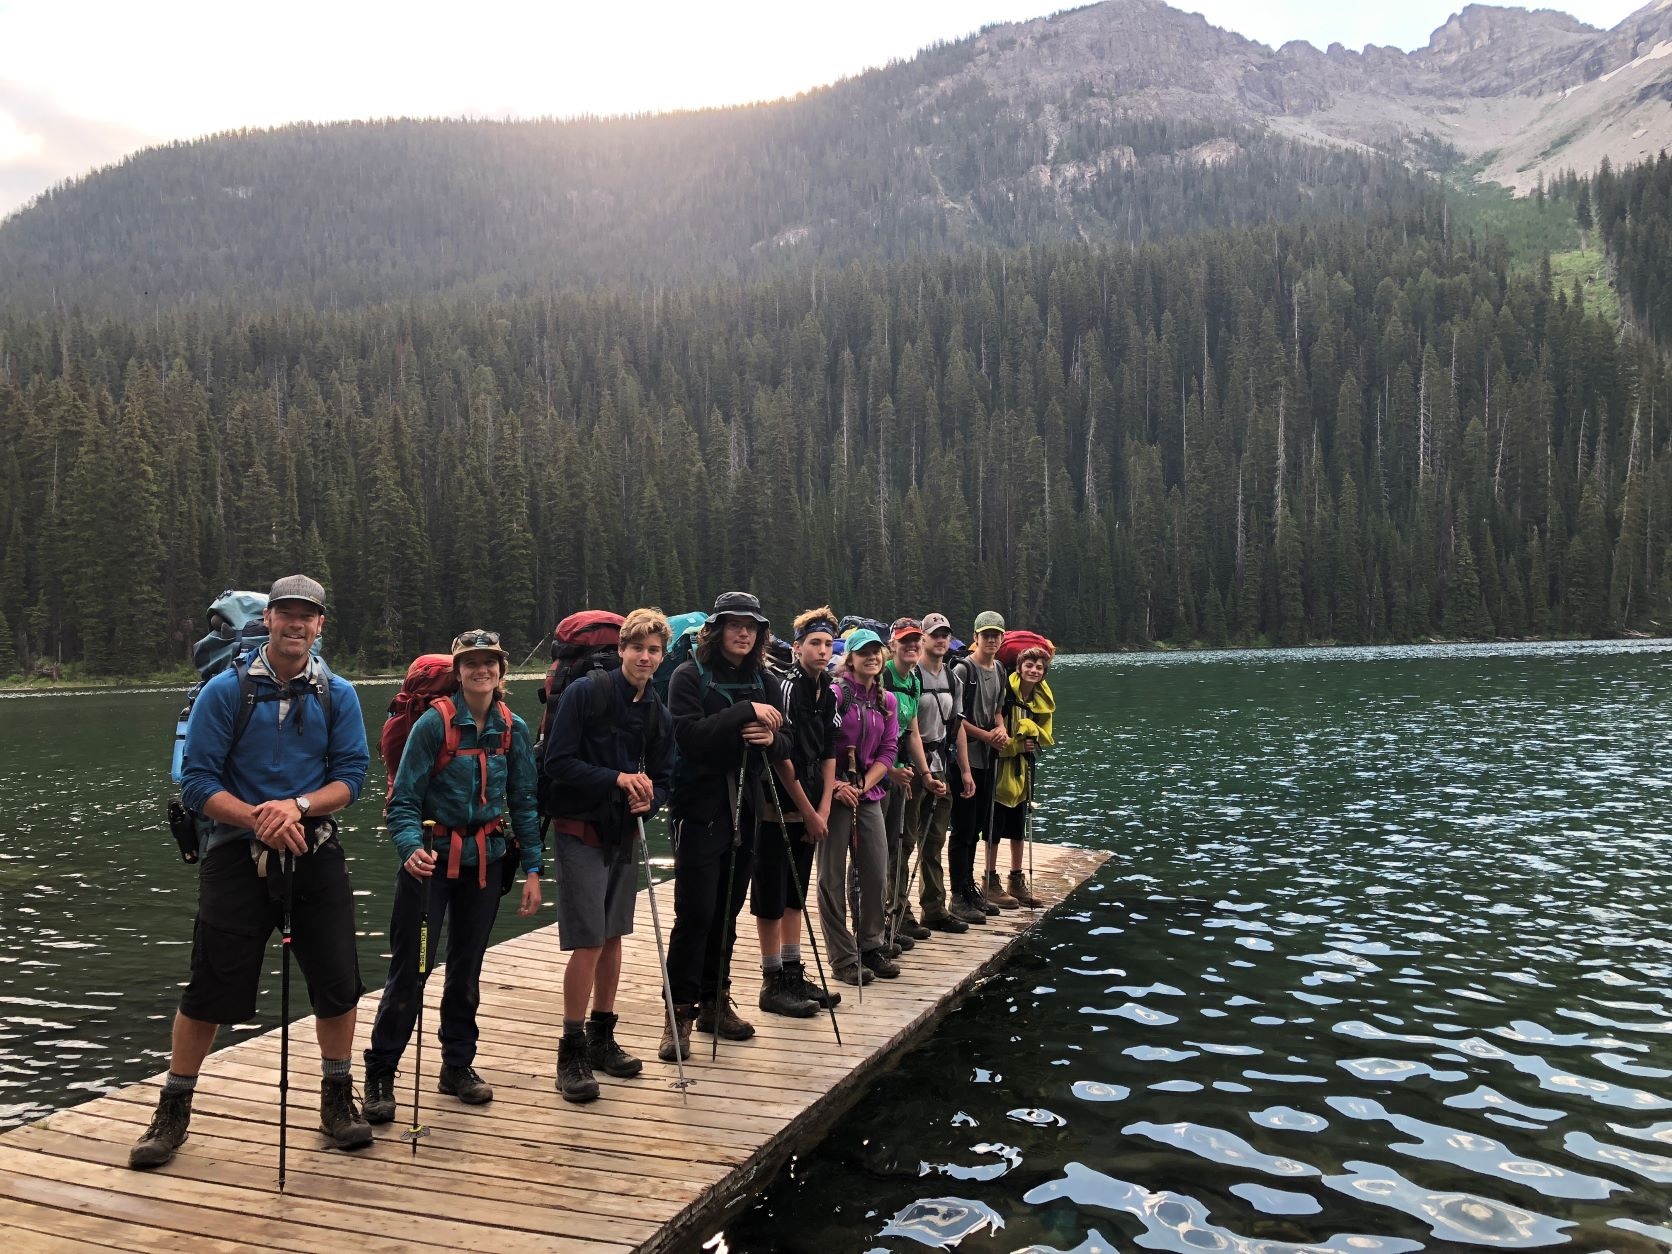 Kootenay students looking for adventure can Go Wild! This summer